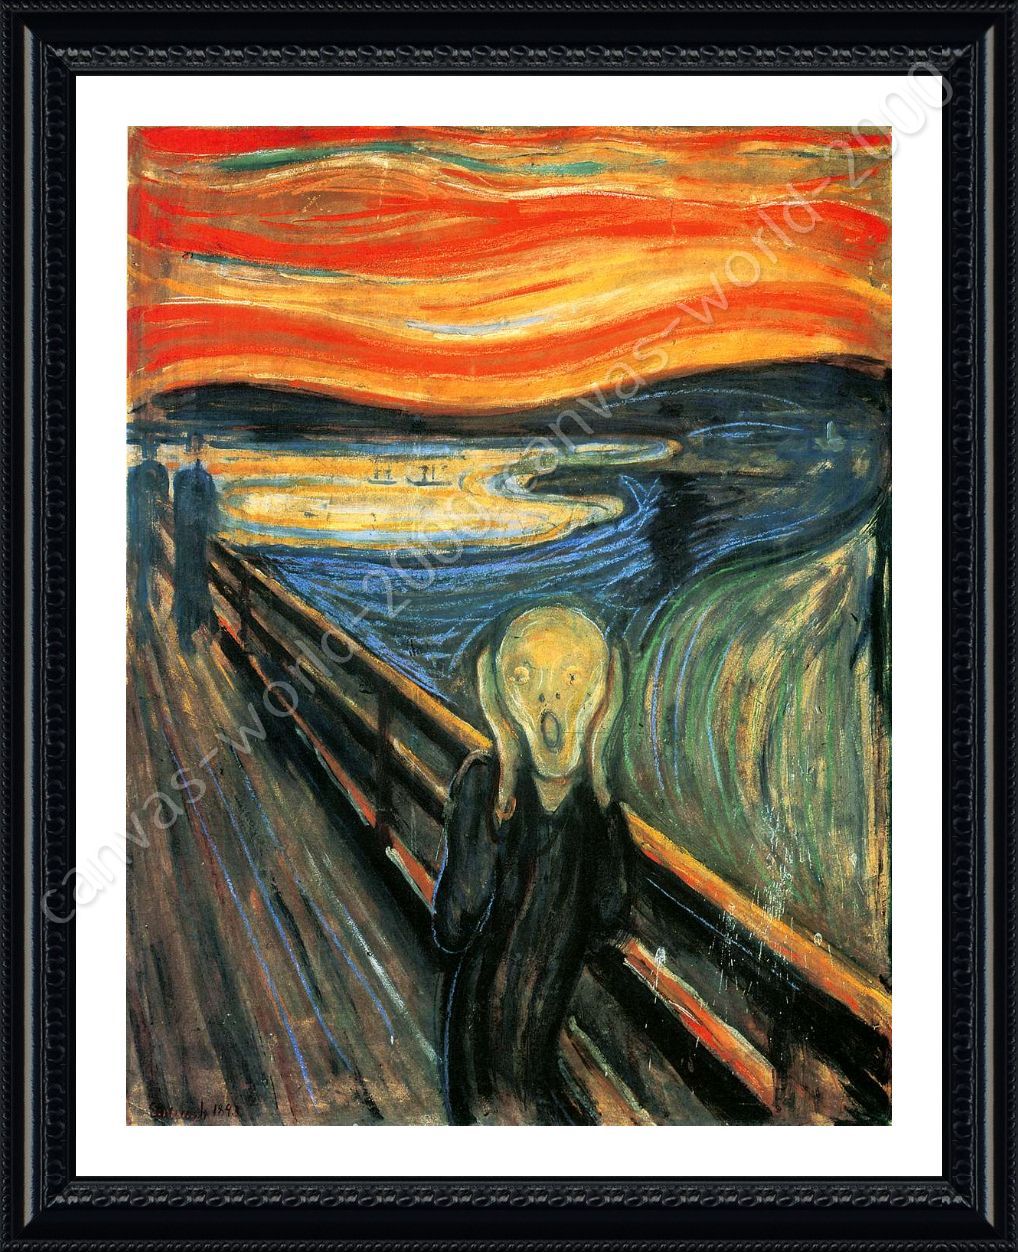 THE SCREAM OIL PAINT BLUE BY EDWARD MUNCH   RE PRINT  ON FRAMED CANVAS WALL ART